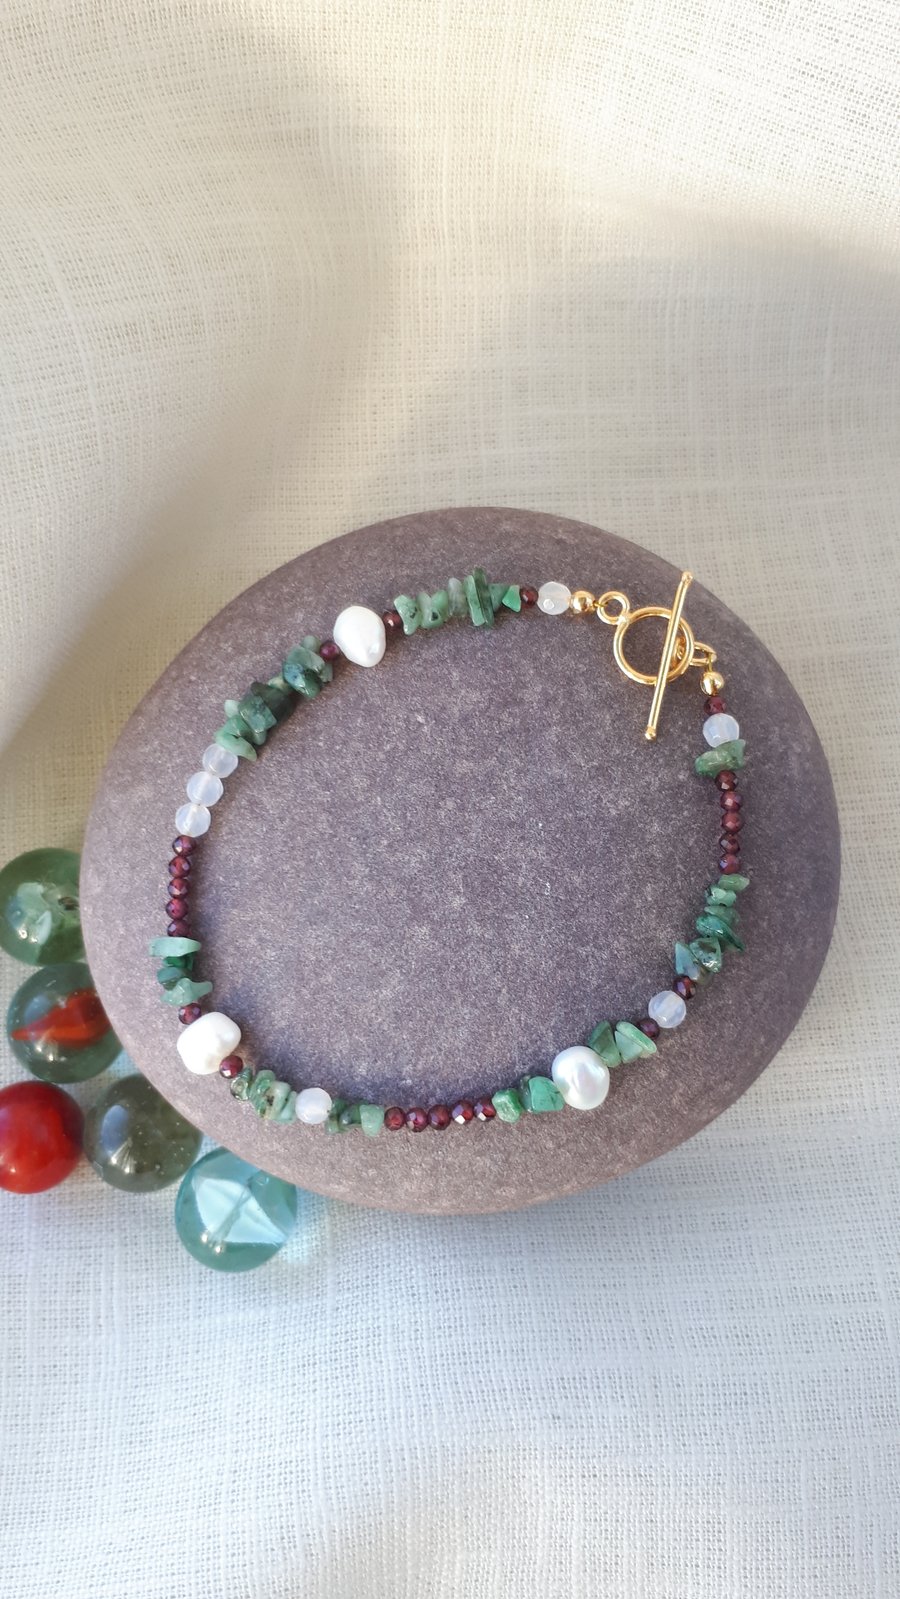 Emerald, garnet,  pearls and quartz bracelet with 925 sterling silver findings